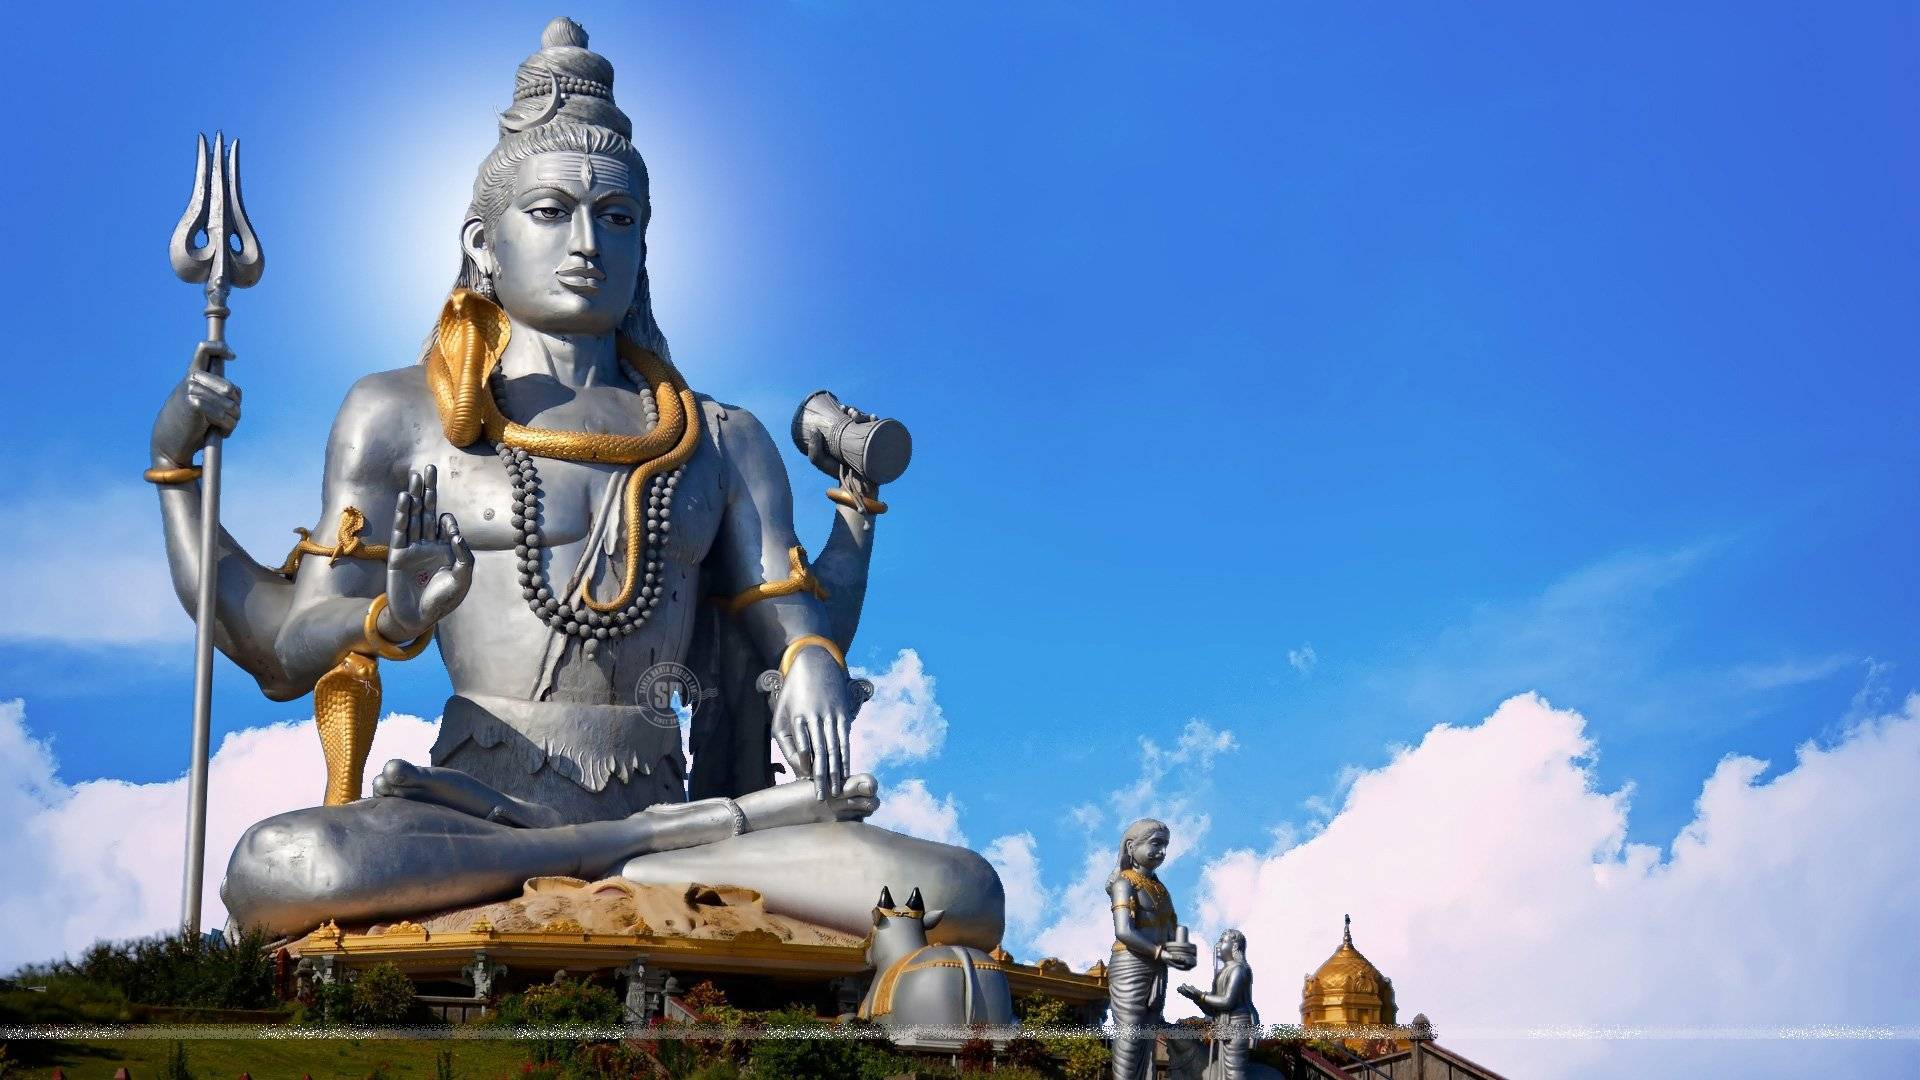 Lord Shiva Full Hd Wallpapers 1080p For Mobile